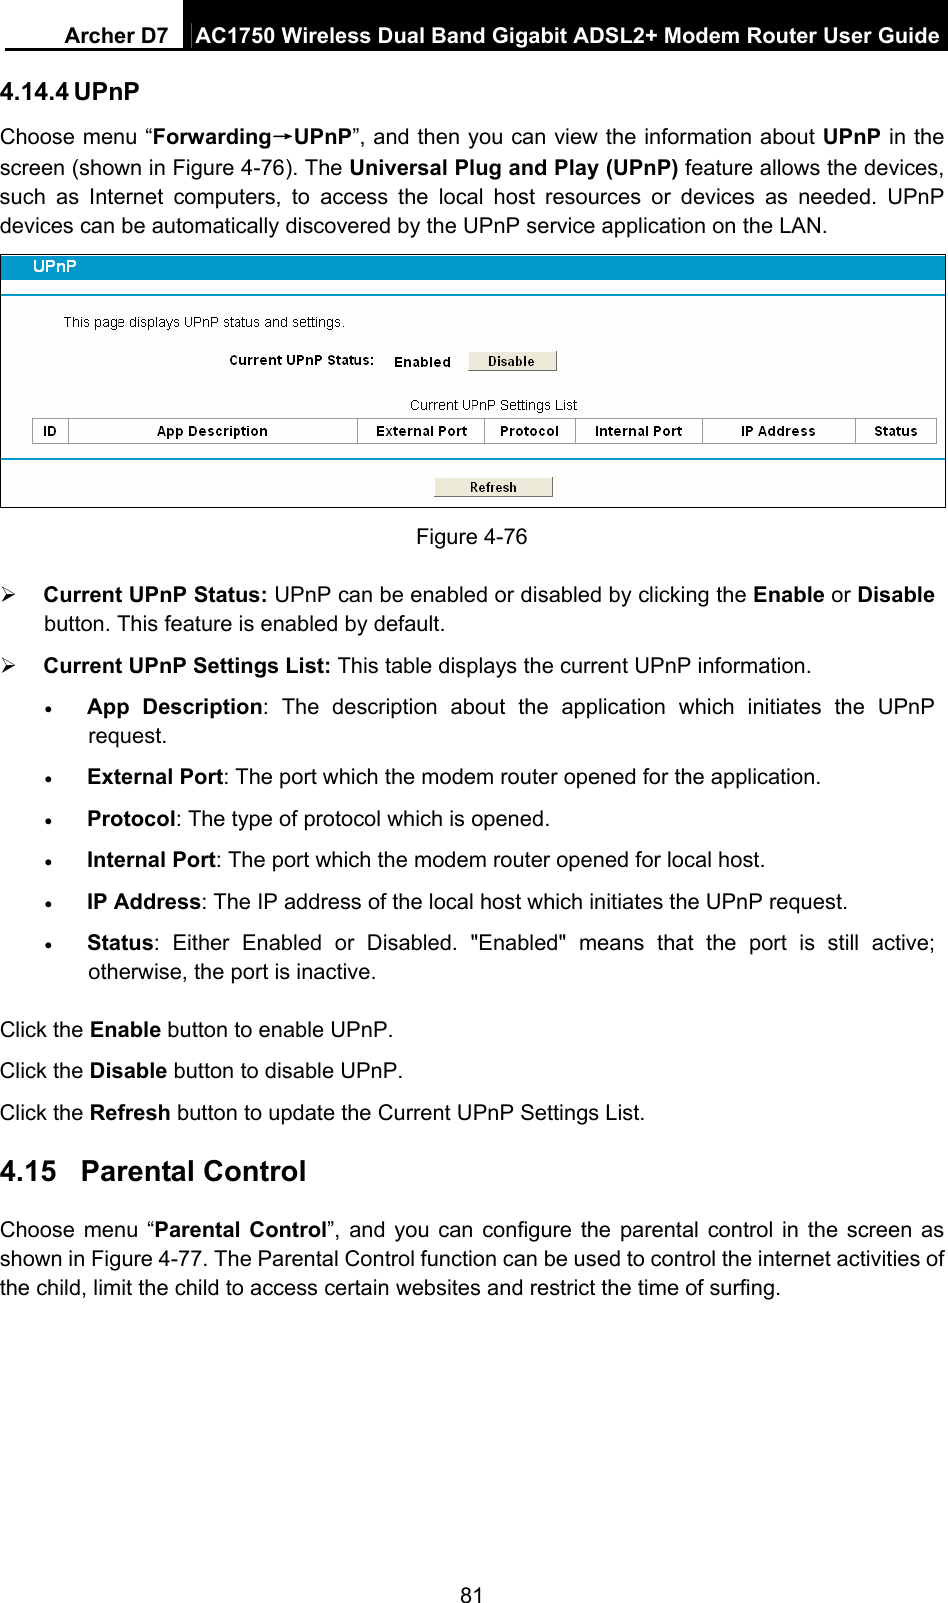 Archer D7  AC1750 Wireless Dual Band Gigabit ADSL2+ Modem Router User Guide 81 4.14.4 UPnP Choose menu “Forwarding→UPnP”, and then you can view the information about UPnP in the screen (shown in Figure 4-76). The Universal Plug and Play (UPnP) feature allows the devices, such as Internet computers, to access the local host resources or devices as needed. UPnP devices can be automatically discovered by the UPnP service application on the LAN.  Figure 4-76  Current UPnP Status: UPnP can be enabled or disabled by clicking the Enable or Disable button. This feature is enabled by default.  Current UPnP Settings List: This table displays the current UPnP information.  App Description: The description about the application which initiates the UPnP request.   External Port: The port which the modem router opened for the application.    Protocol: The type of protocol which is opened.    Internal Port: The port which the modem router opened for local host.    IP Address: The IP address of the local host which initiates the UPnP request.    Status: Either Enabled or Disabled. &quot;Enabled&quot; means that the port is still active; otherwise, the port is inactive.   Click the Enable button to enable UPnP. Click the Disable button to disable UPnP. Click the Refresh button to update the Current UPnP Settings List.   4.15  Parental Control Choose menu “Parental Control”, and you can configure the parental control in the screen as shown in Figure 4-77. The Parental Control function can be used to control the internet activities of the child, limit the child to access certain websites and restrict the time of surfing. 